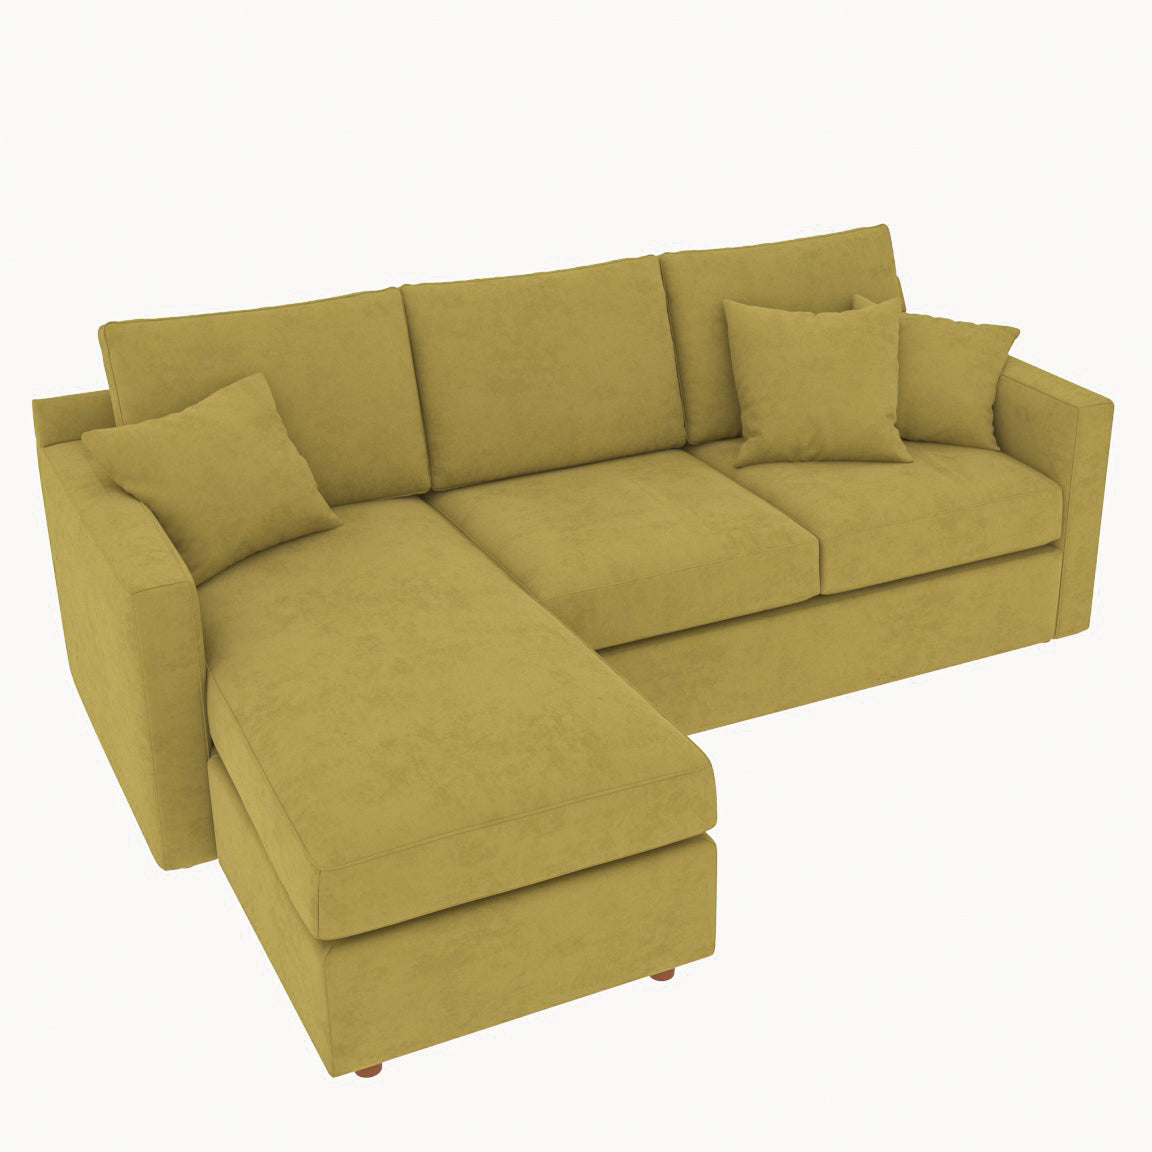 Antique Finish Coloured with Premium Comfort L Shaped 4 Seater Sofa Set for Home Sofa